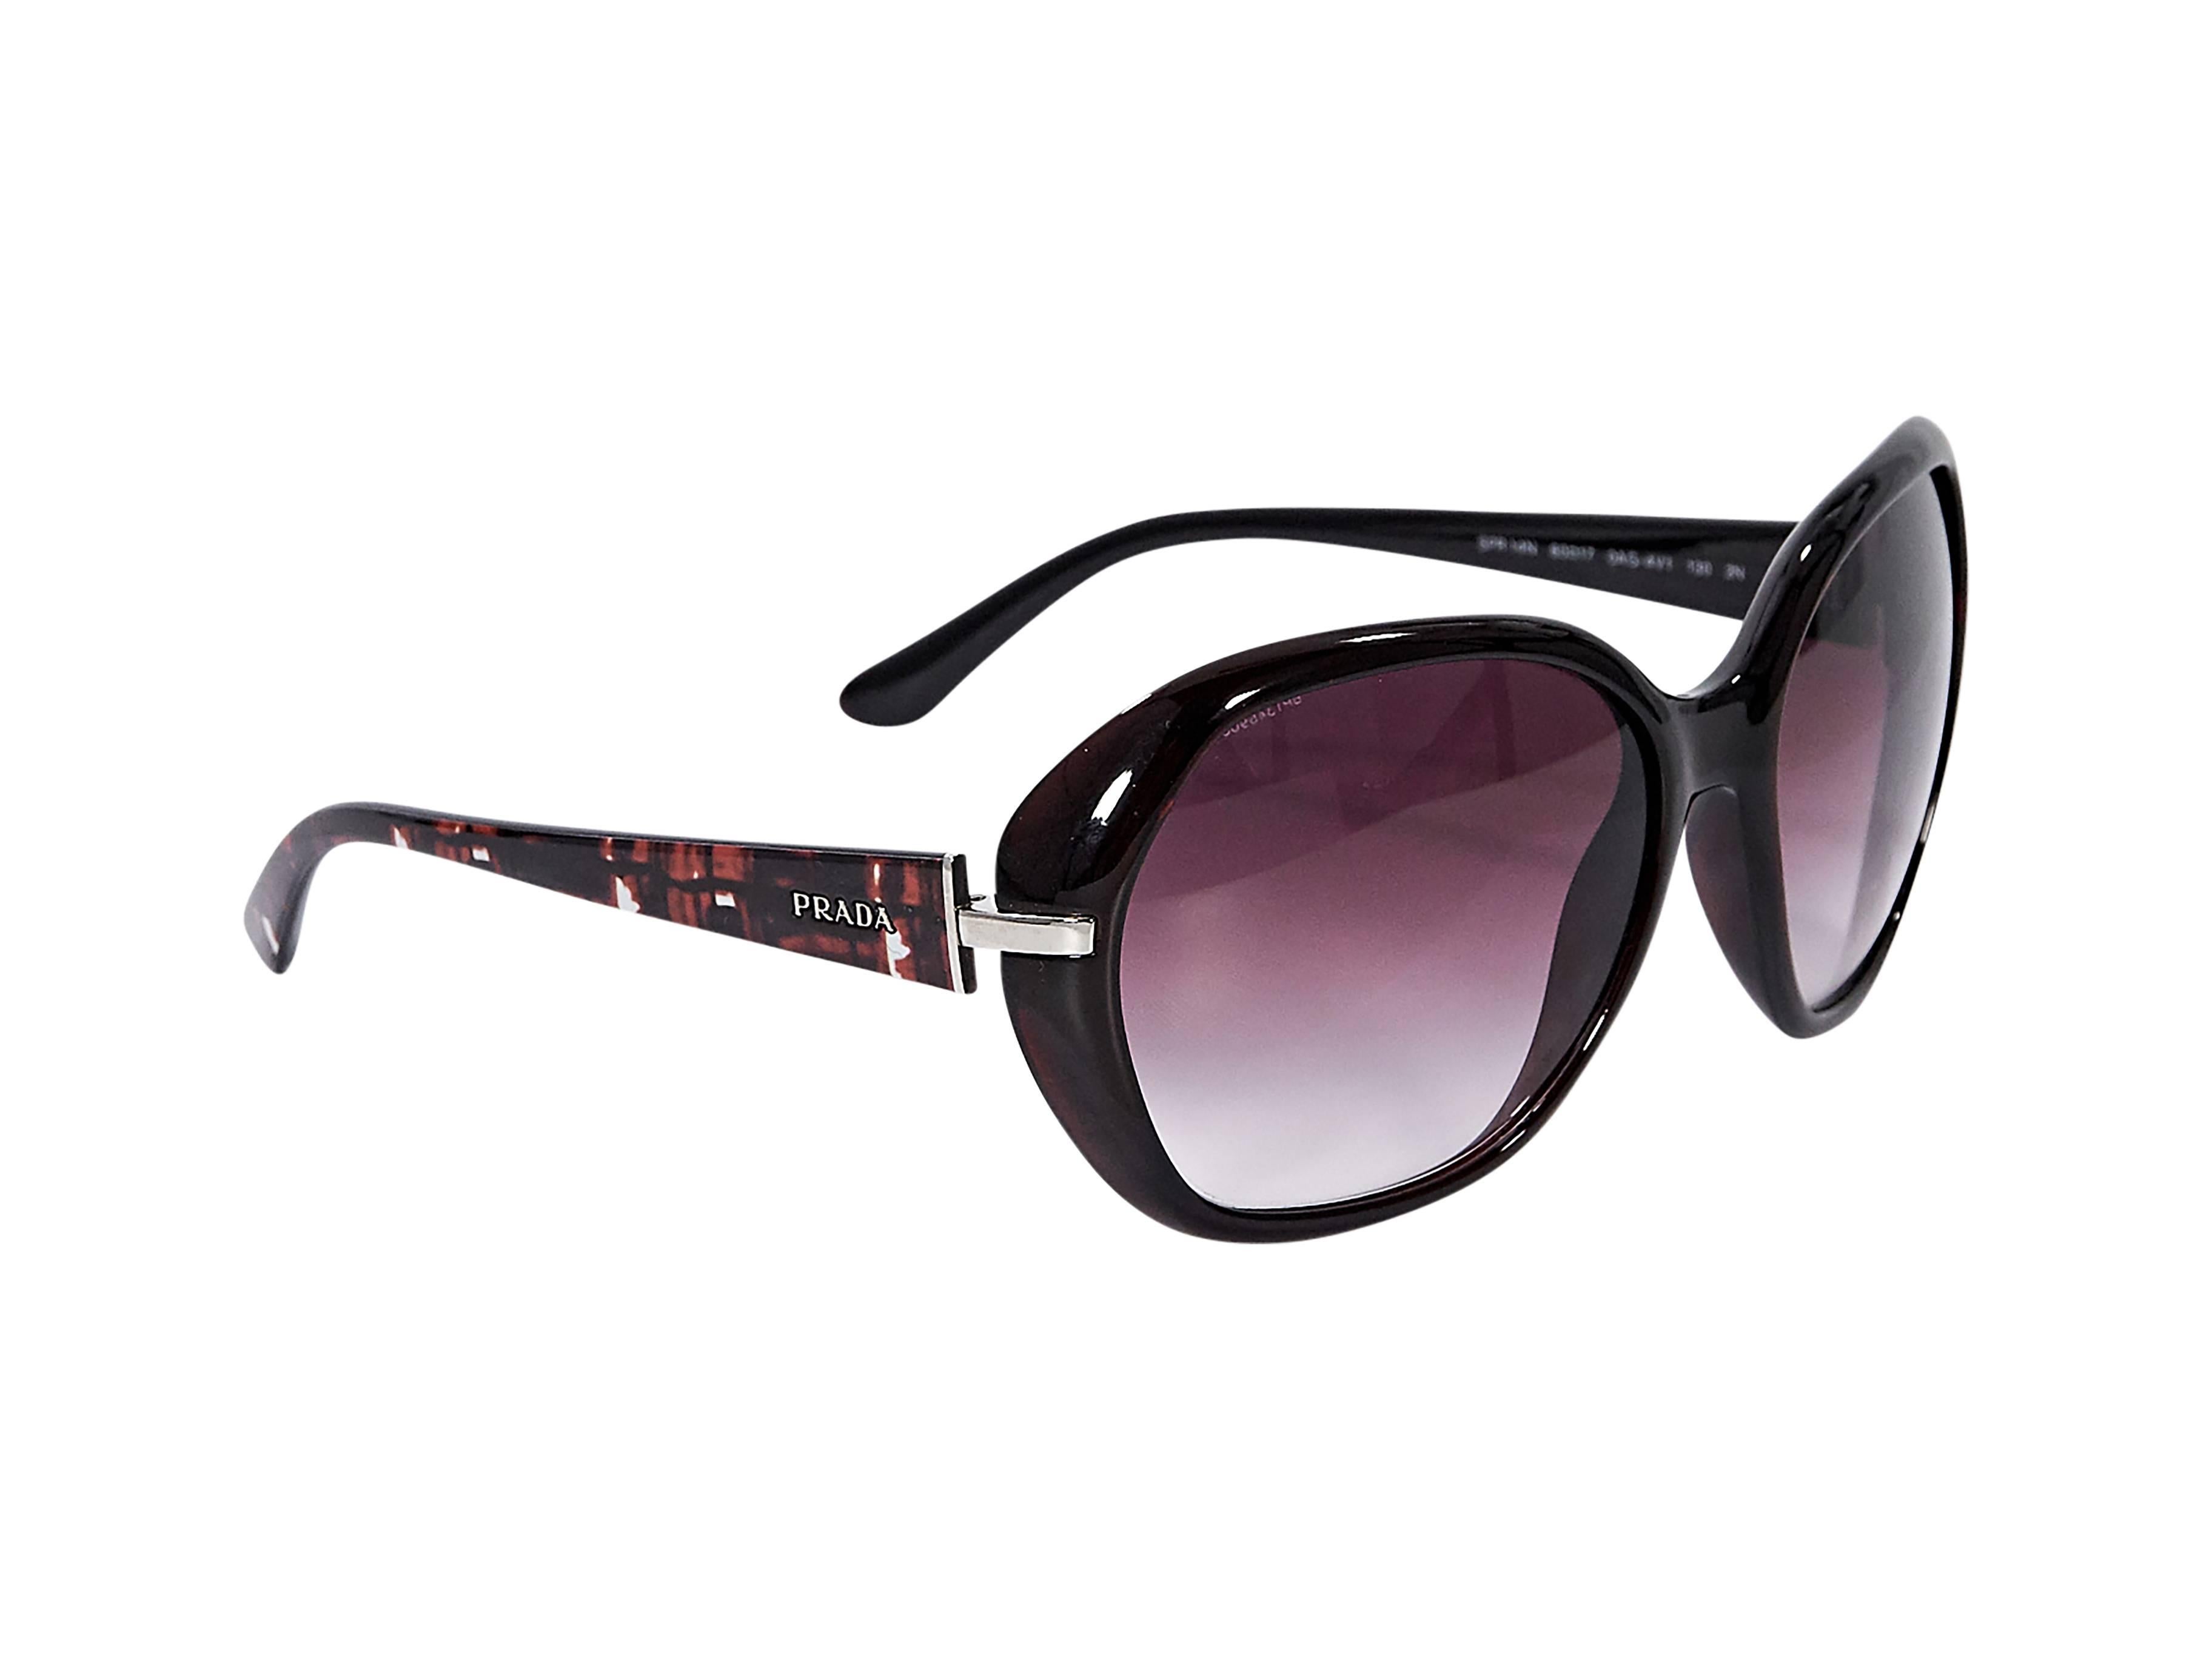 Product details: Burgundy sunglasses by Prada. Gradient lenses. Tapered stems. 
Condition: Pre-owned. Very good.

Est. Retail $ 548.00